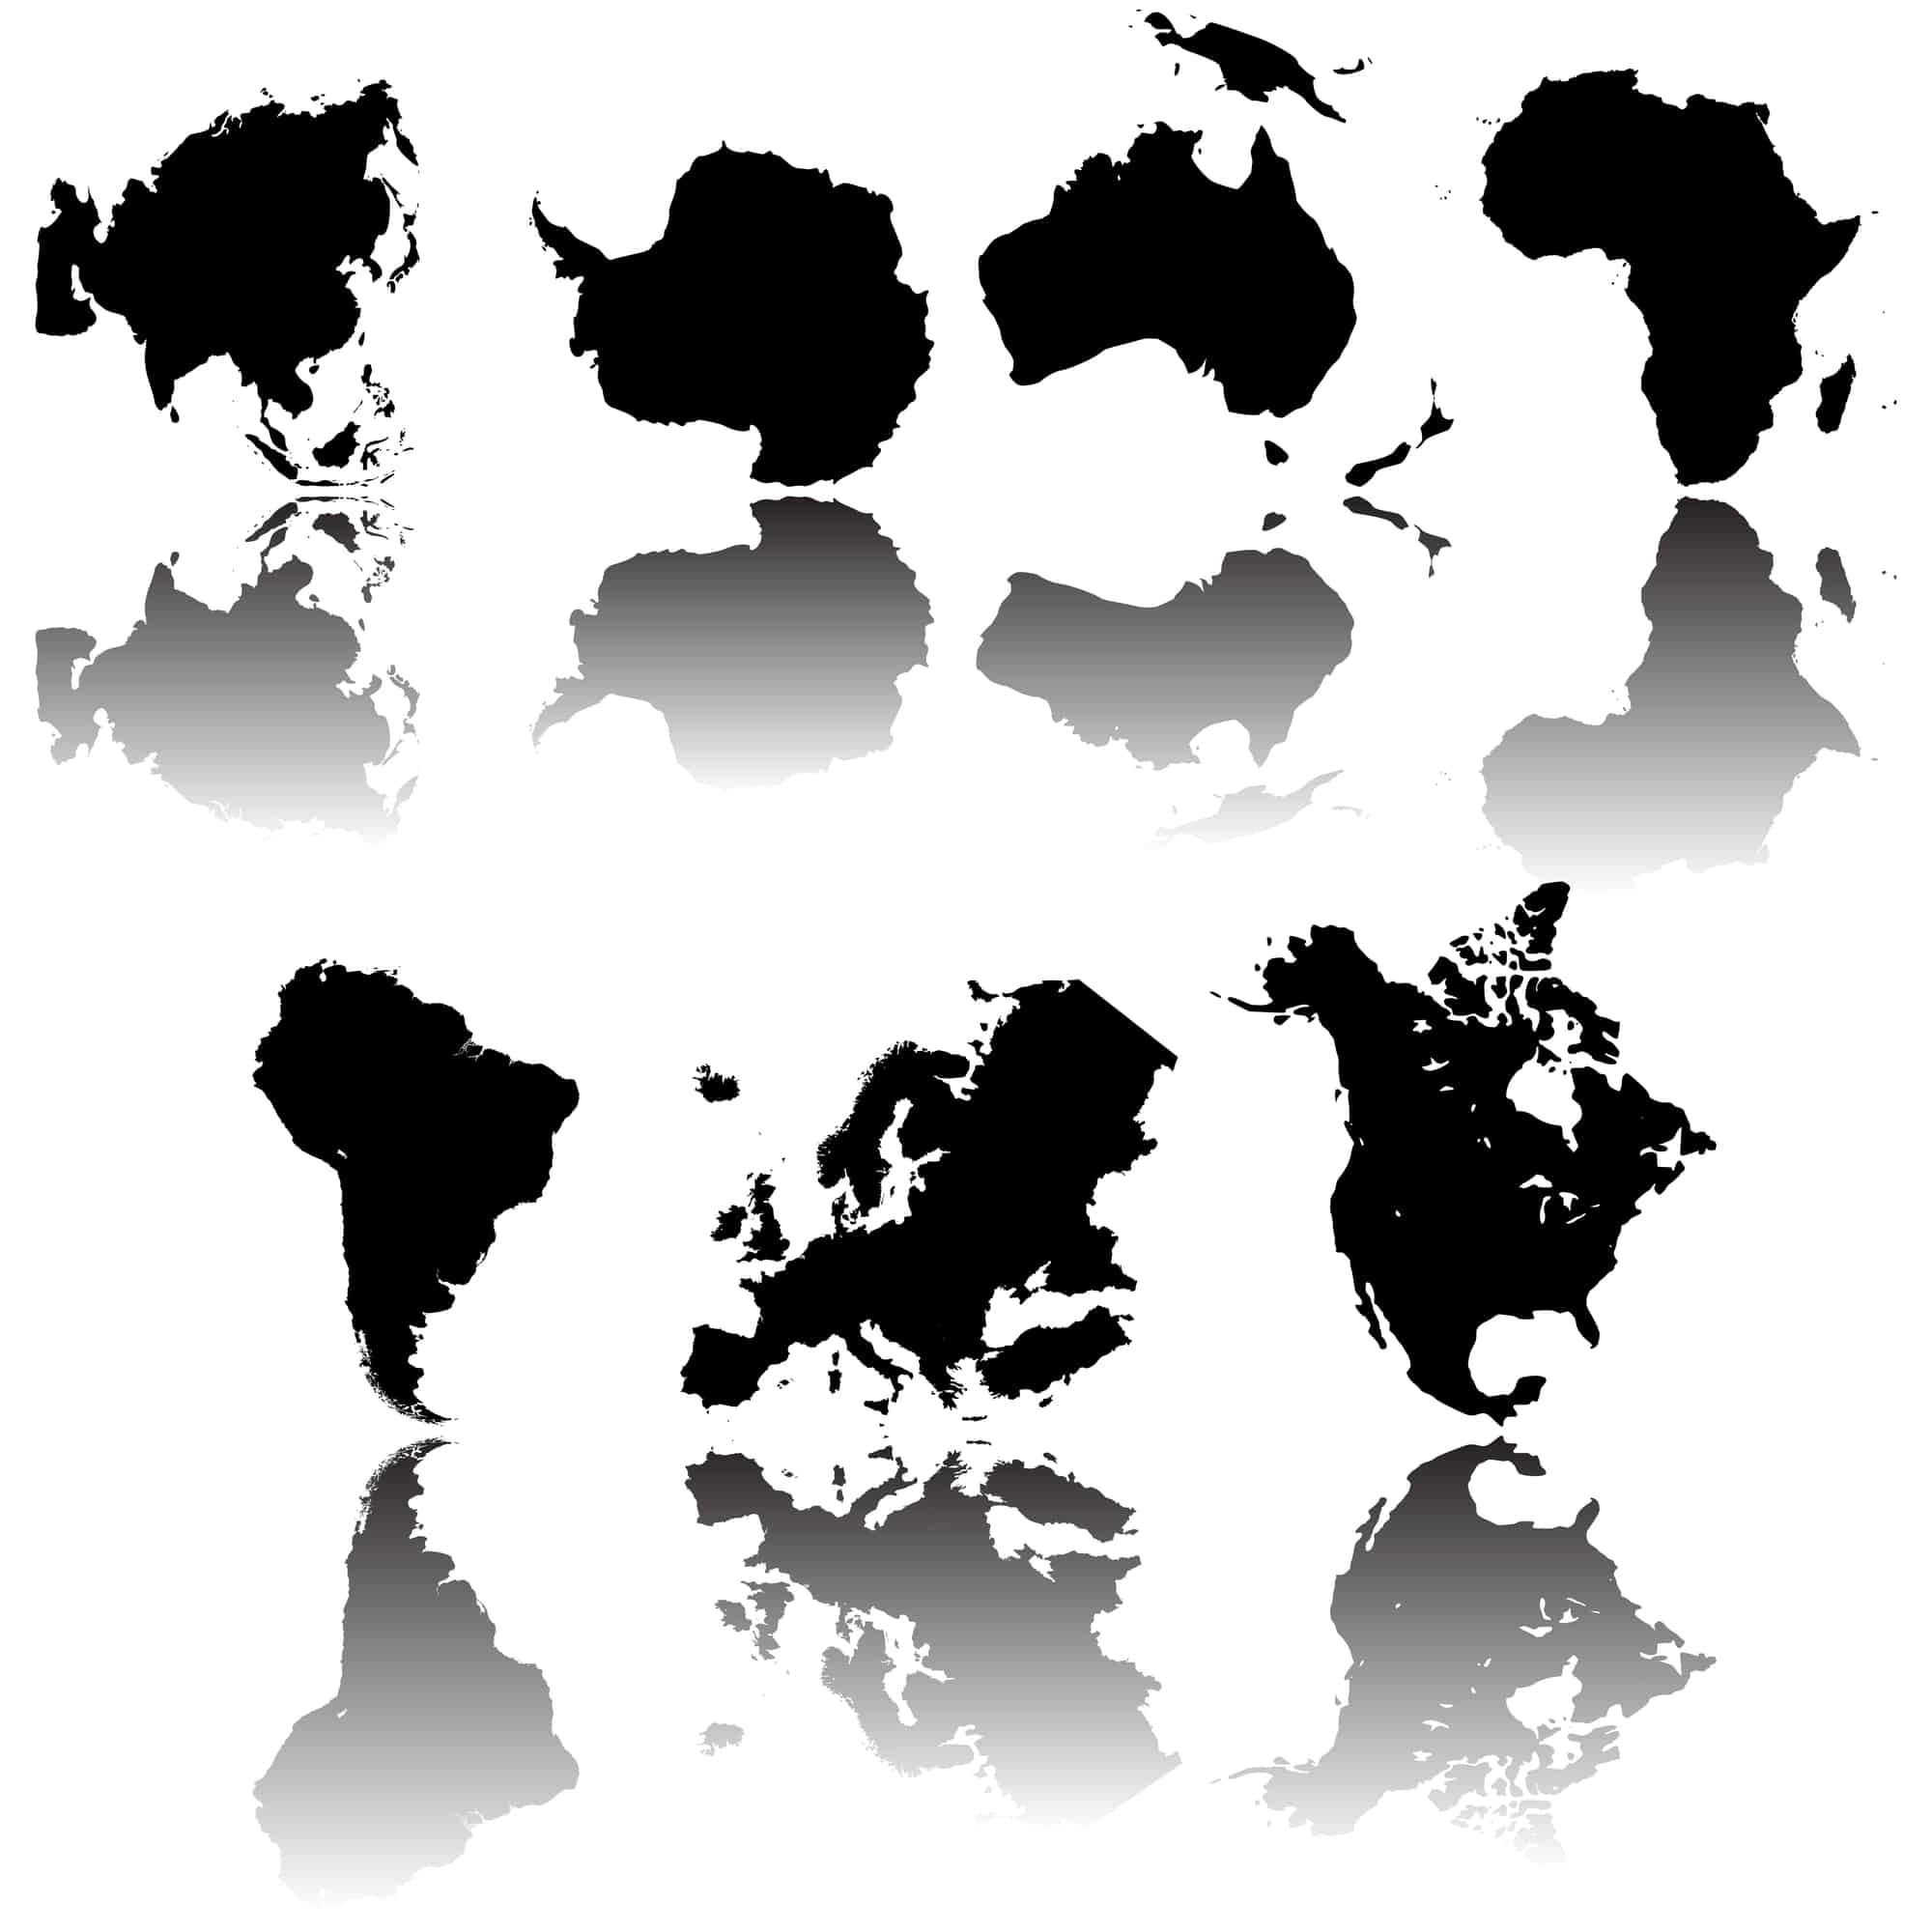 7 Continents maps